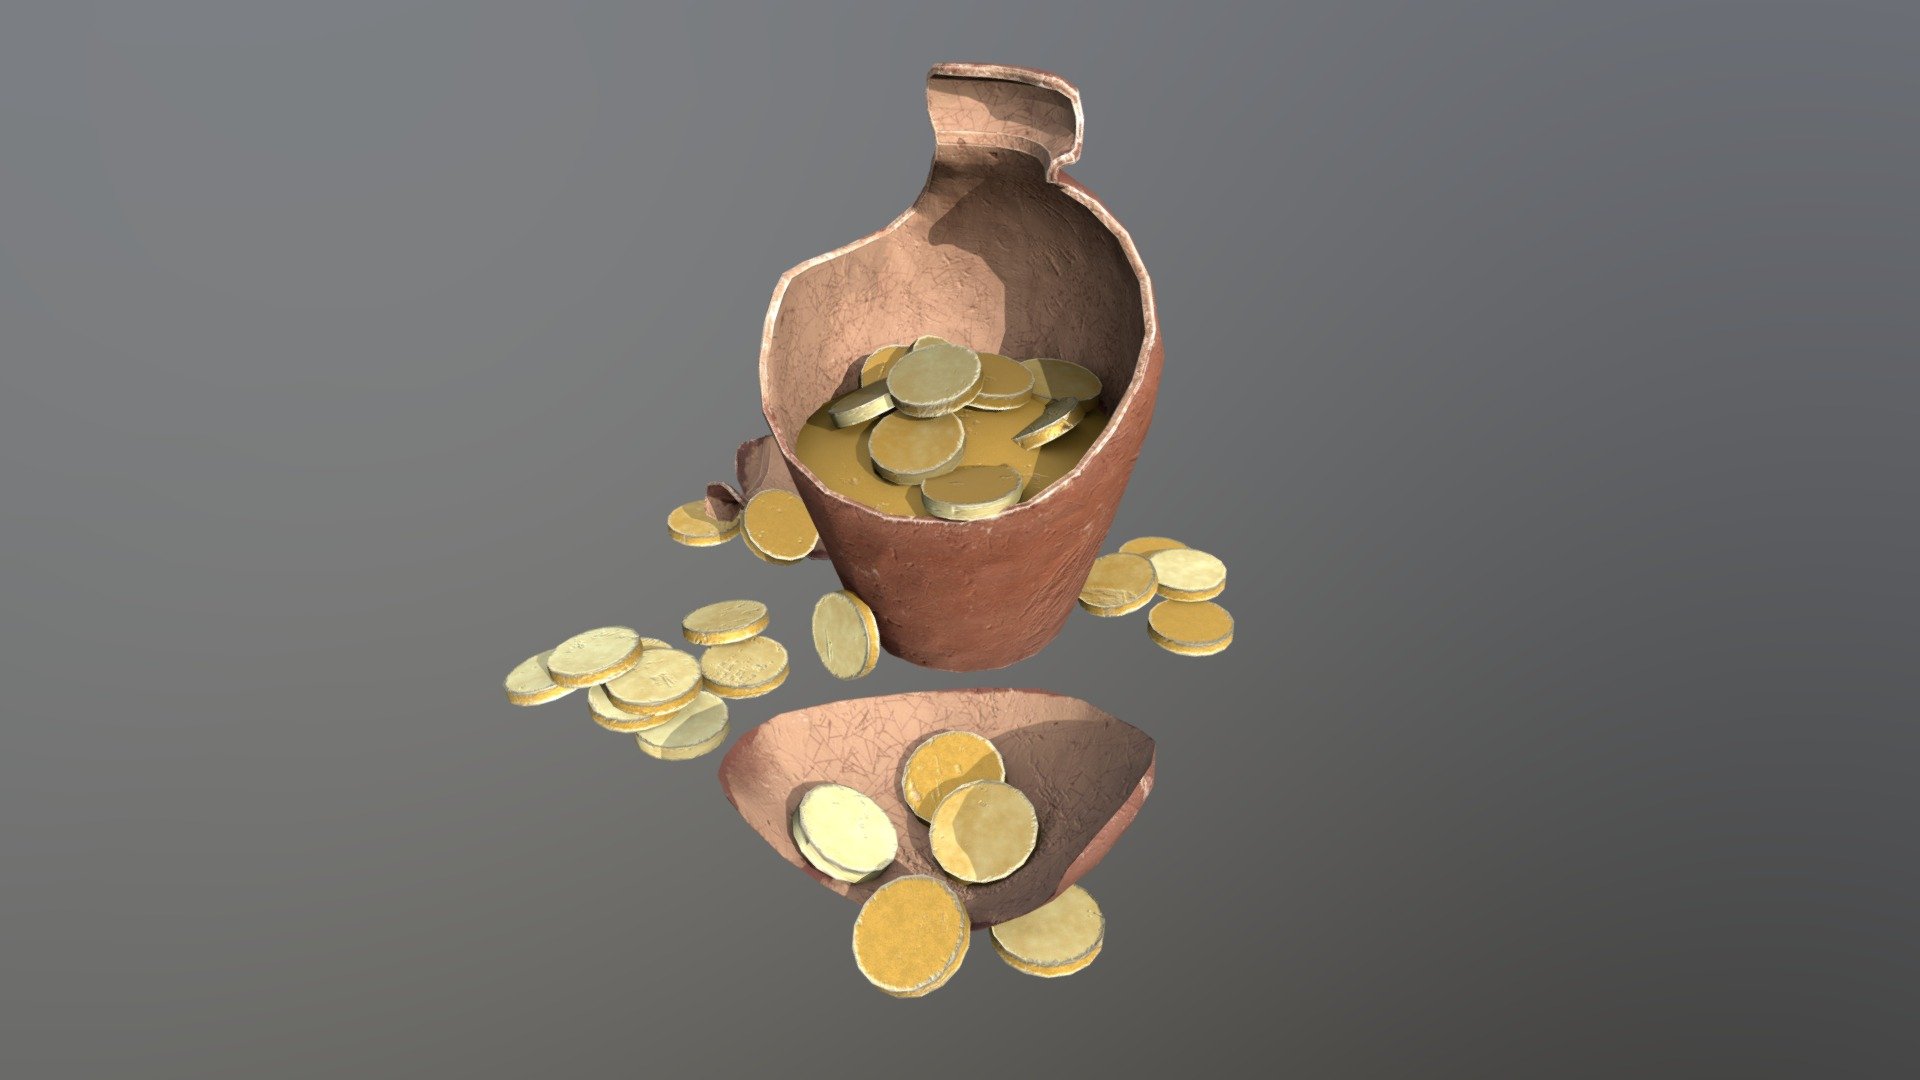 Old broken clay vase with gold coins
Tris: 6 060

Texture 2k.
PBR Material.
Hand painted textures - CoinsClay (Game ready asset for Unity URp) - Download Free 3D model by Viktor_ (@Viktor.Zhuravlev) 3d model